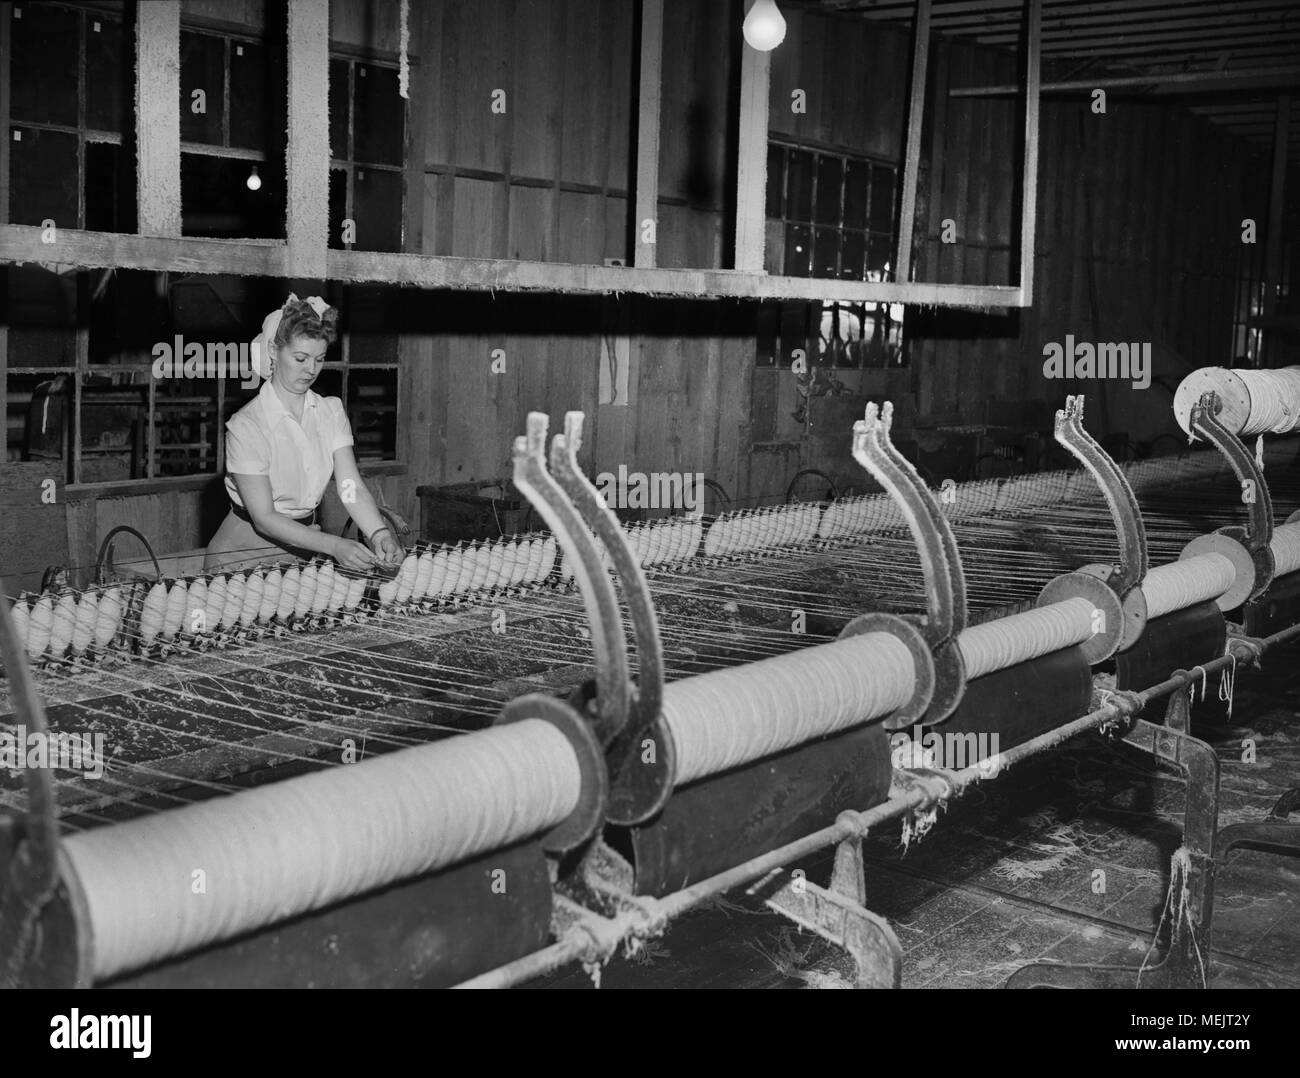 A worker watches an early industrial plastic manufacturing process in a ...